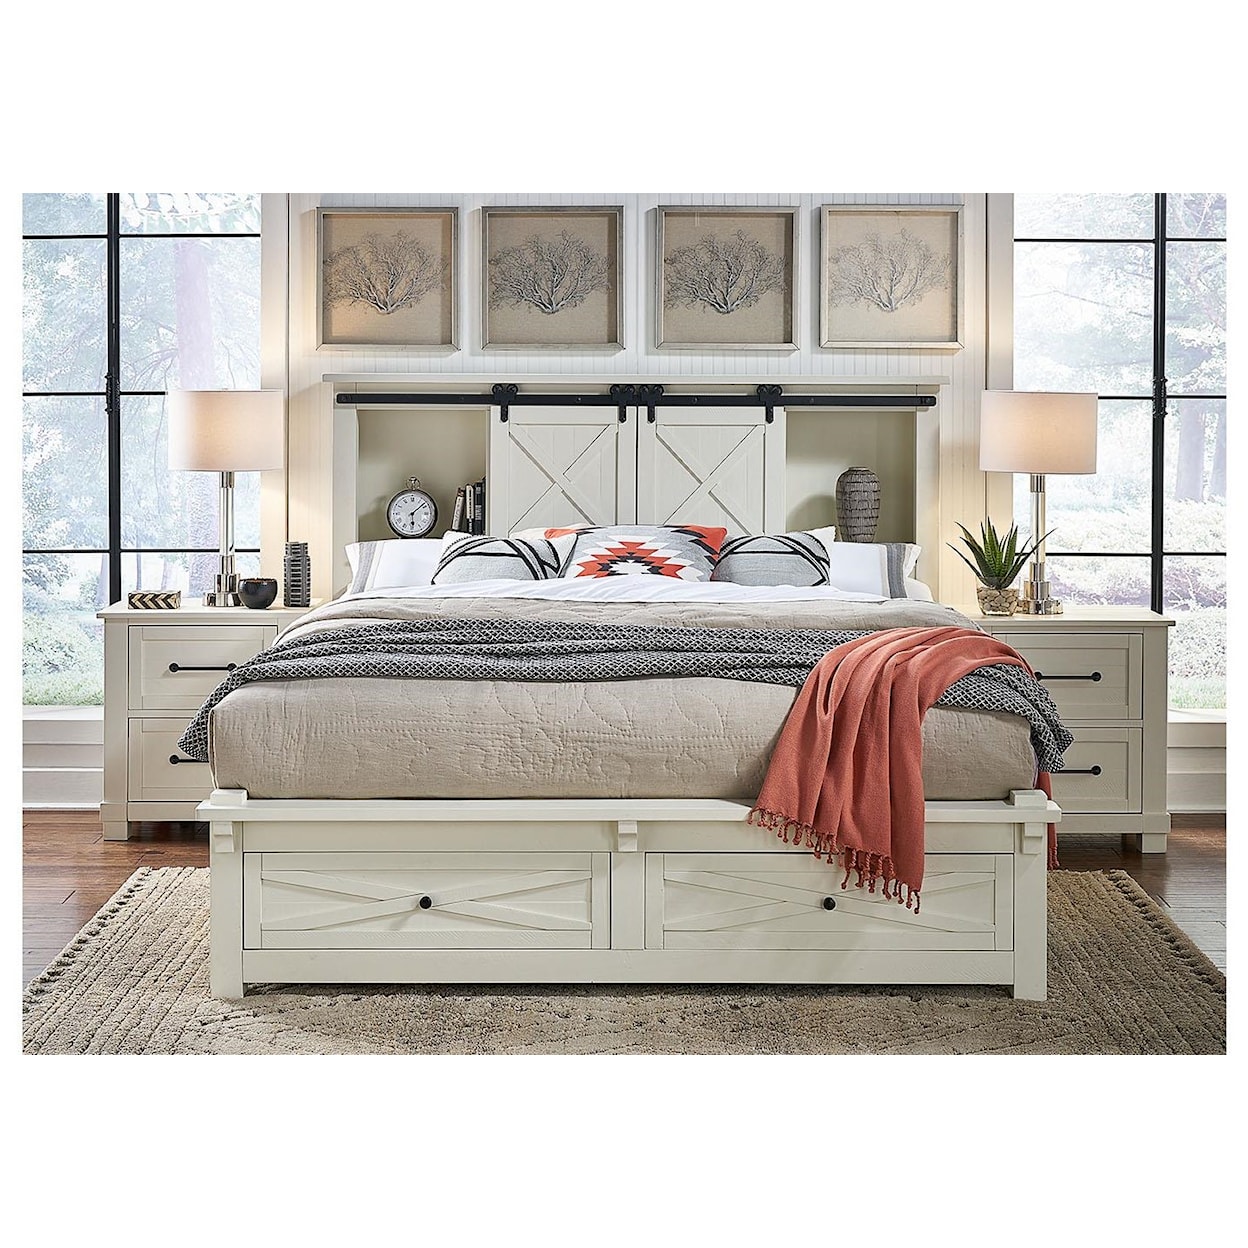 AAmerica Sun Valley California King Bookcase Bed